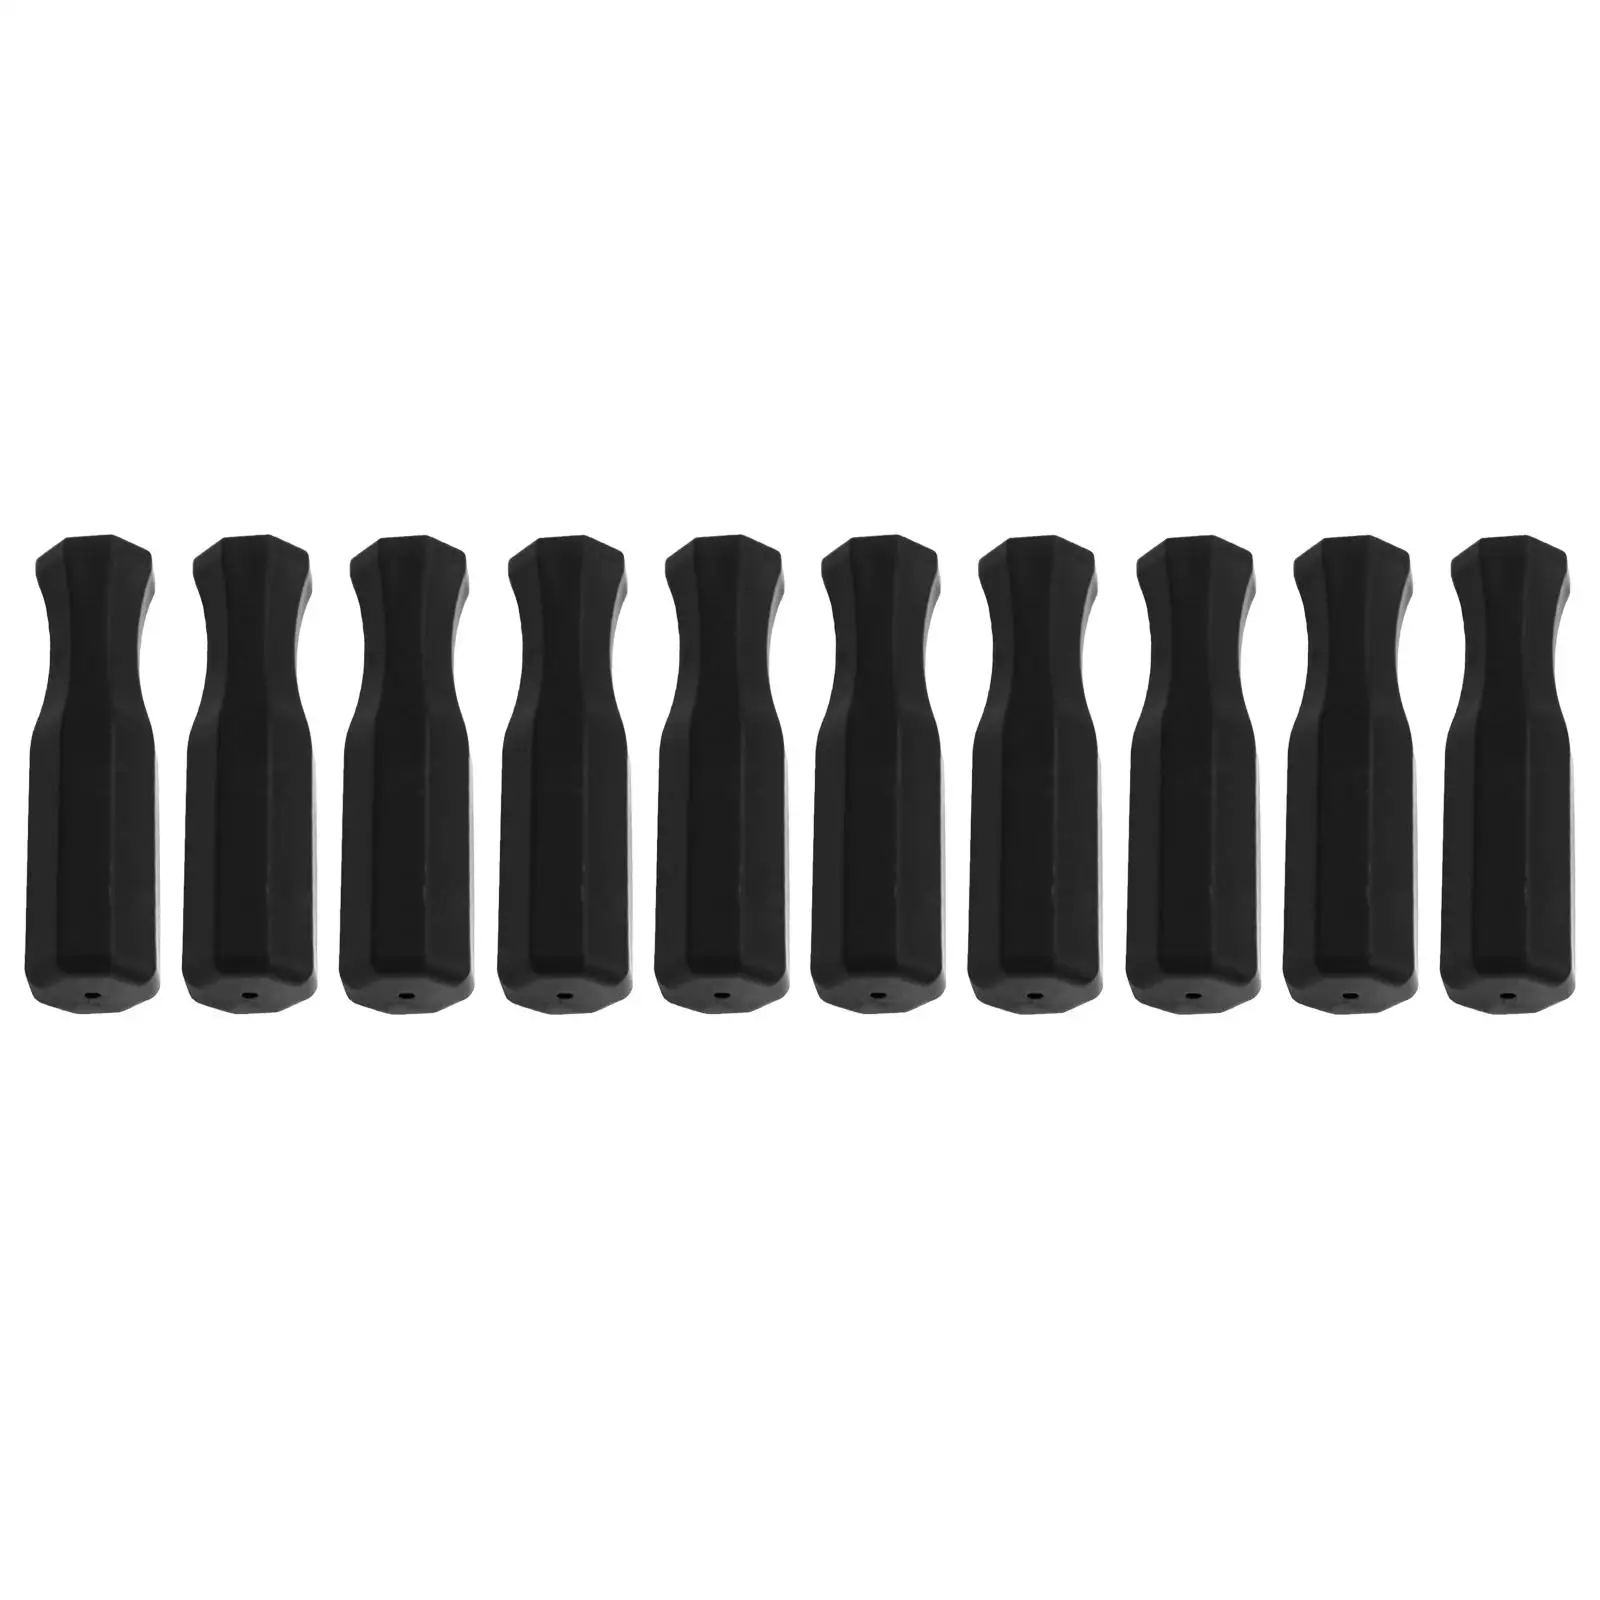 10pcs Table Soccer Parts Replacement Kids Children Football Handle Grip Tabletop Soccer Game Accessories